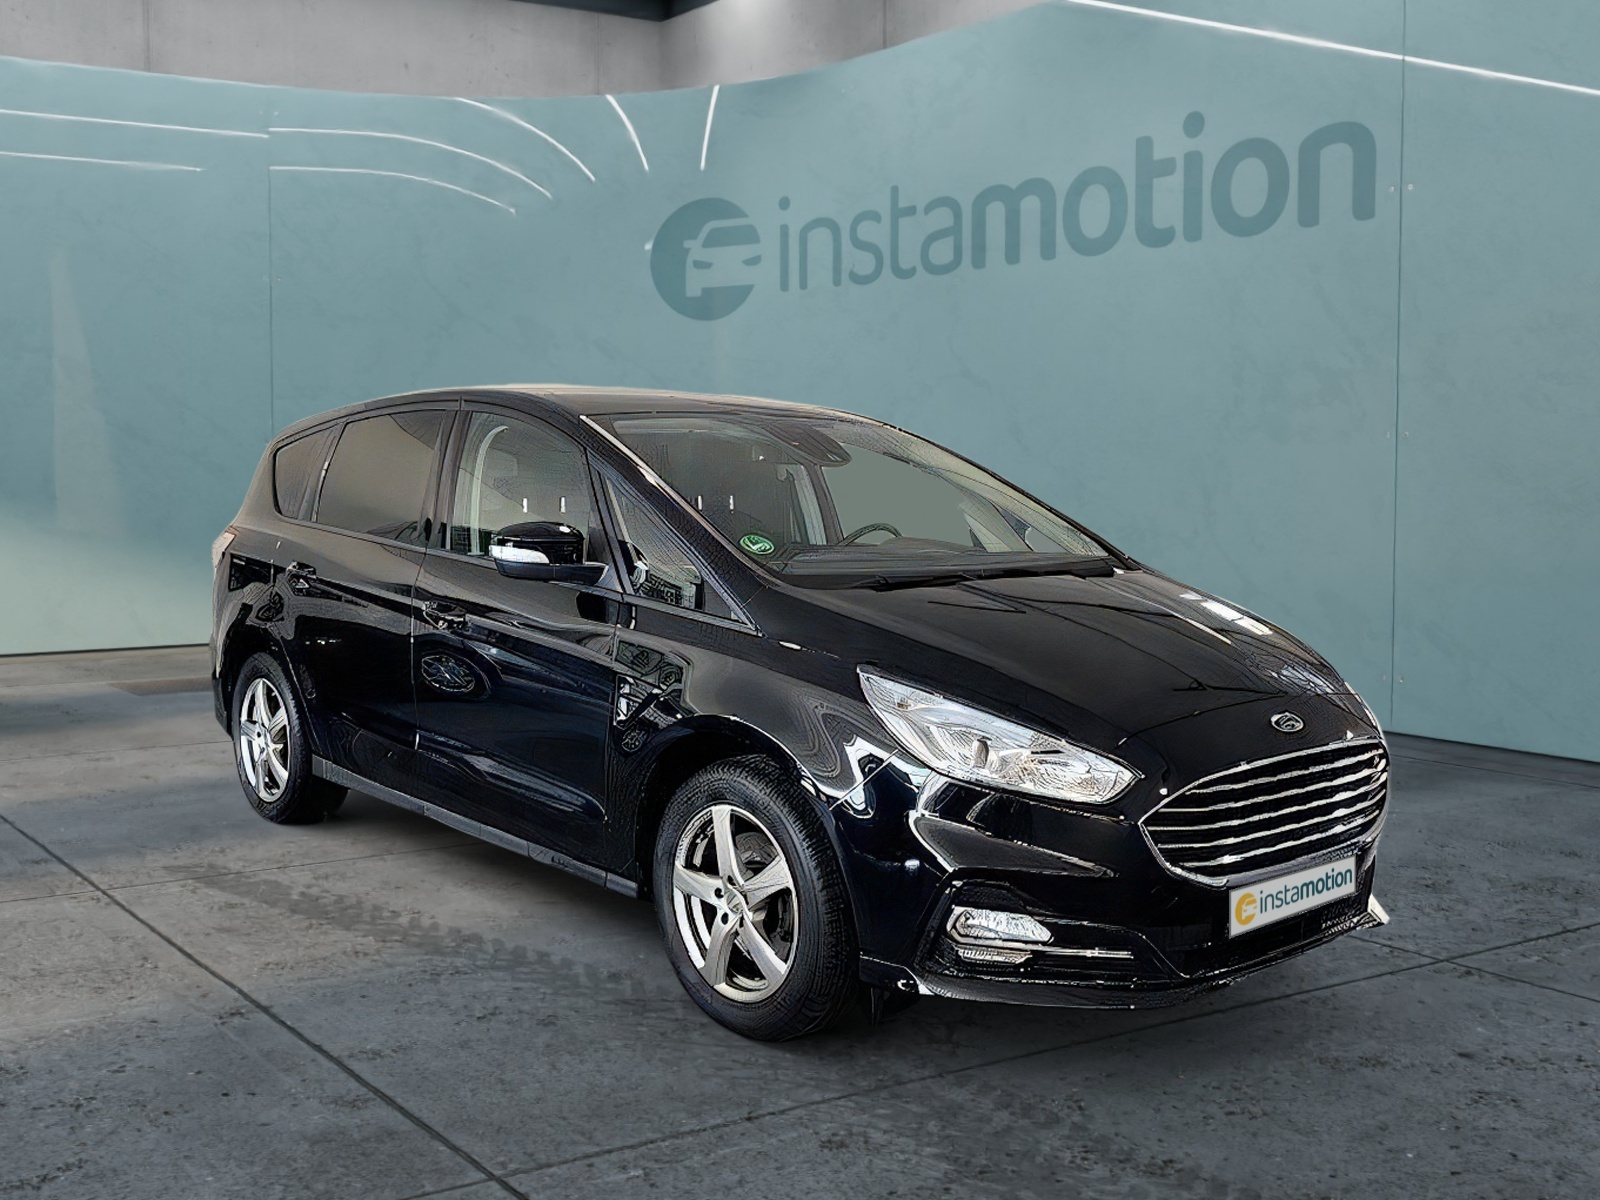 Ford S-Max 1.5 EcoBoost